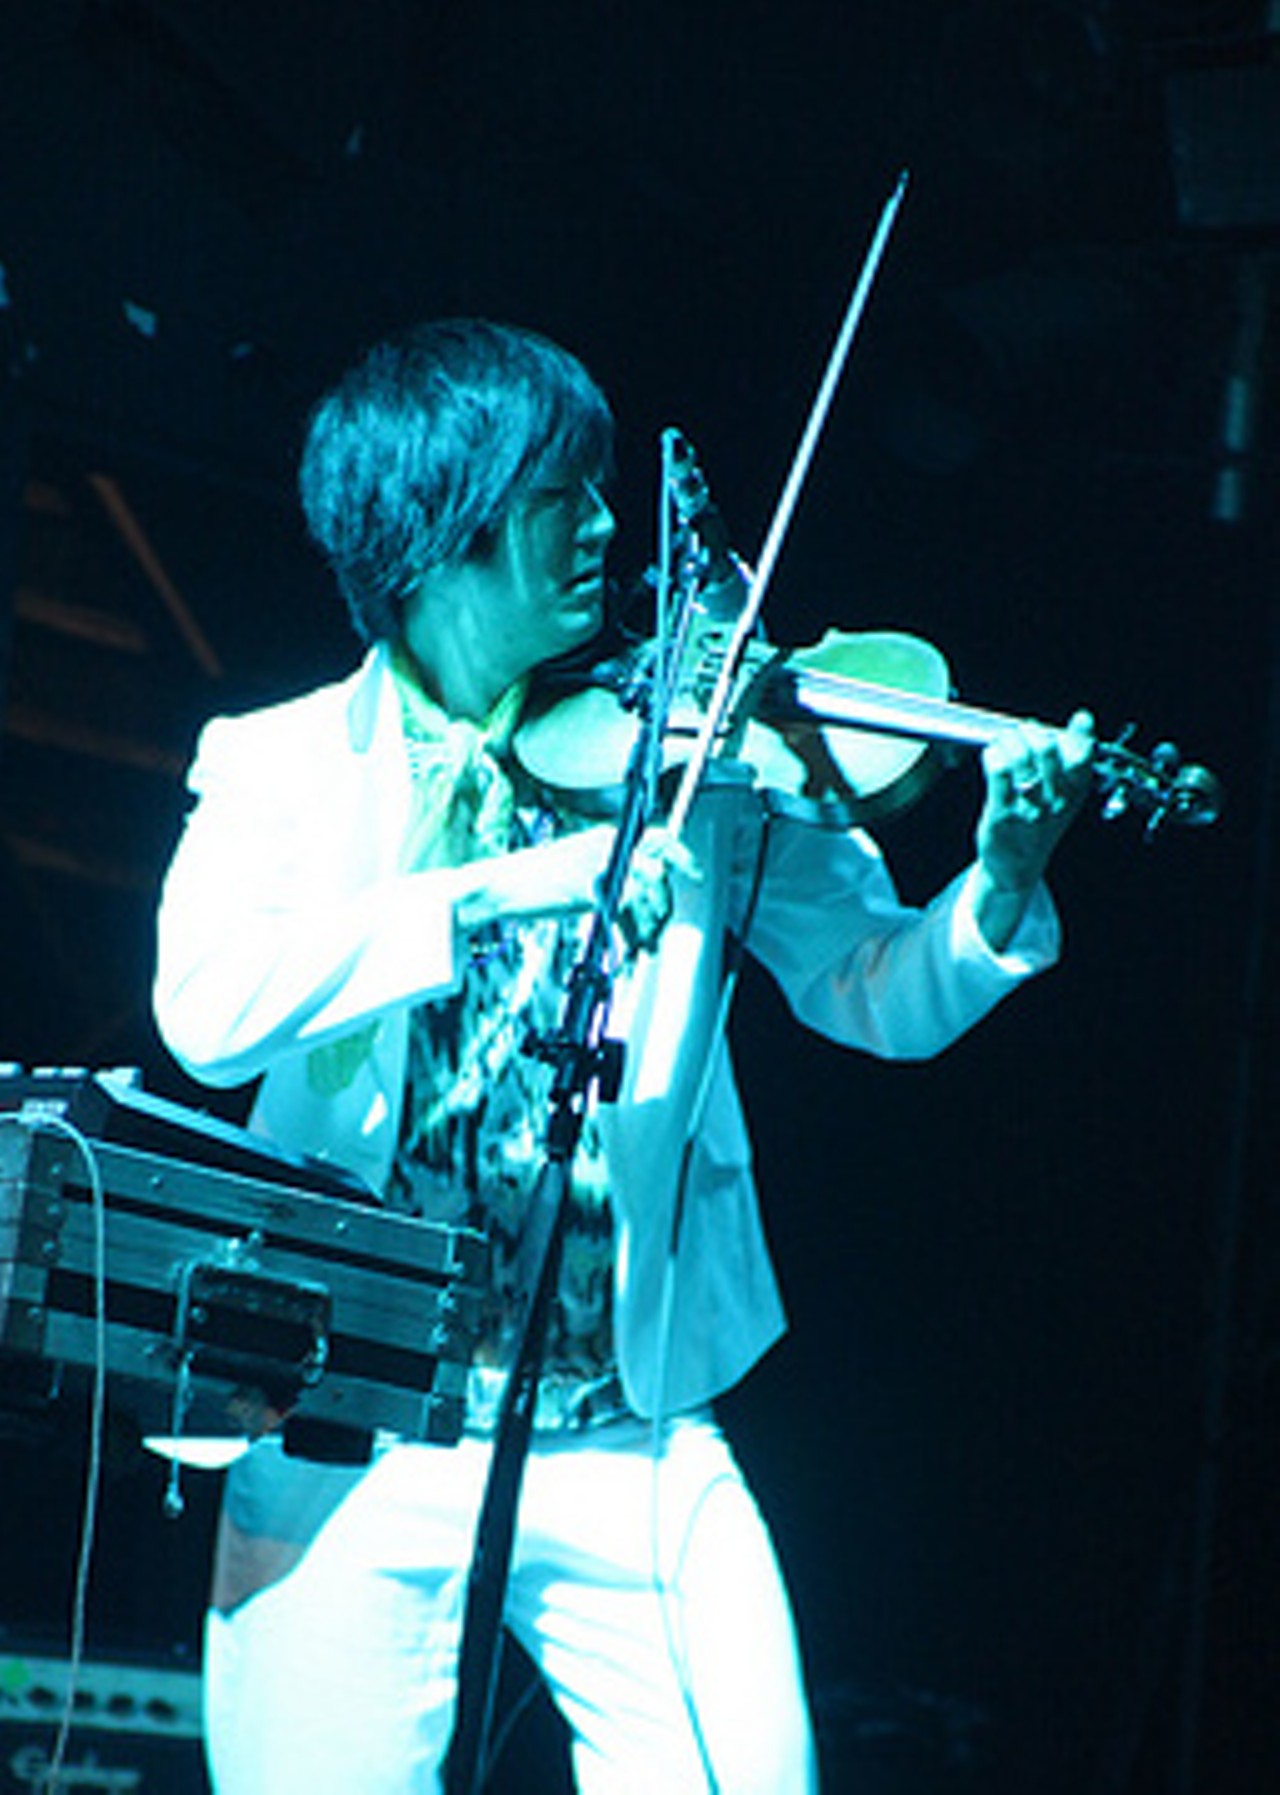 K. Ishibashi diverted from the road to classical music to tour with the likes of Regina Spektor, Sondre Lerche and of Montreal. During that time, the composer's solo project emerged as Kishi Bashi, and in 2012, he issued the Kickstarter-funded album 151a Full of lush soothing soundscapes of looped violin, synths and guitars, that release spawned the happy-anthem hit "Bright Whites." Kishi Bashi takes his established formula and adds more oomph on the new album: Lighght. Taking a harder lean toward the synth-pop aesthetic, Lighght hits you with heavier bass drums and thicker leads without overshadowing the layered violins. Lead single "Philosophize In It! Chemicalize With It!" starts with a simple violin melody that quickly escalates to a lush layered psychedelic song with quirky squeaky violin breaks and lushly orchestrated pastoral imagery. "Hahaha Pt. 1 & 2" is an epic journey from light shiny pop song to deep dark ambient soundscape, emerging in an exuberant dance jam. He takes the stage at 8:30 p.m. tonight at the Grog Shop.(Gonzalez)